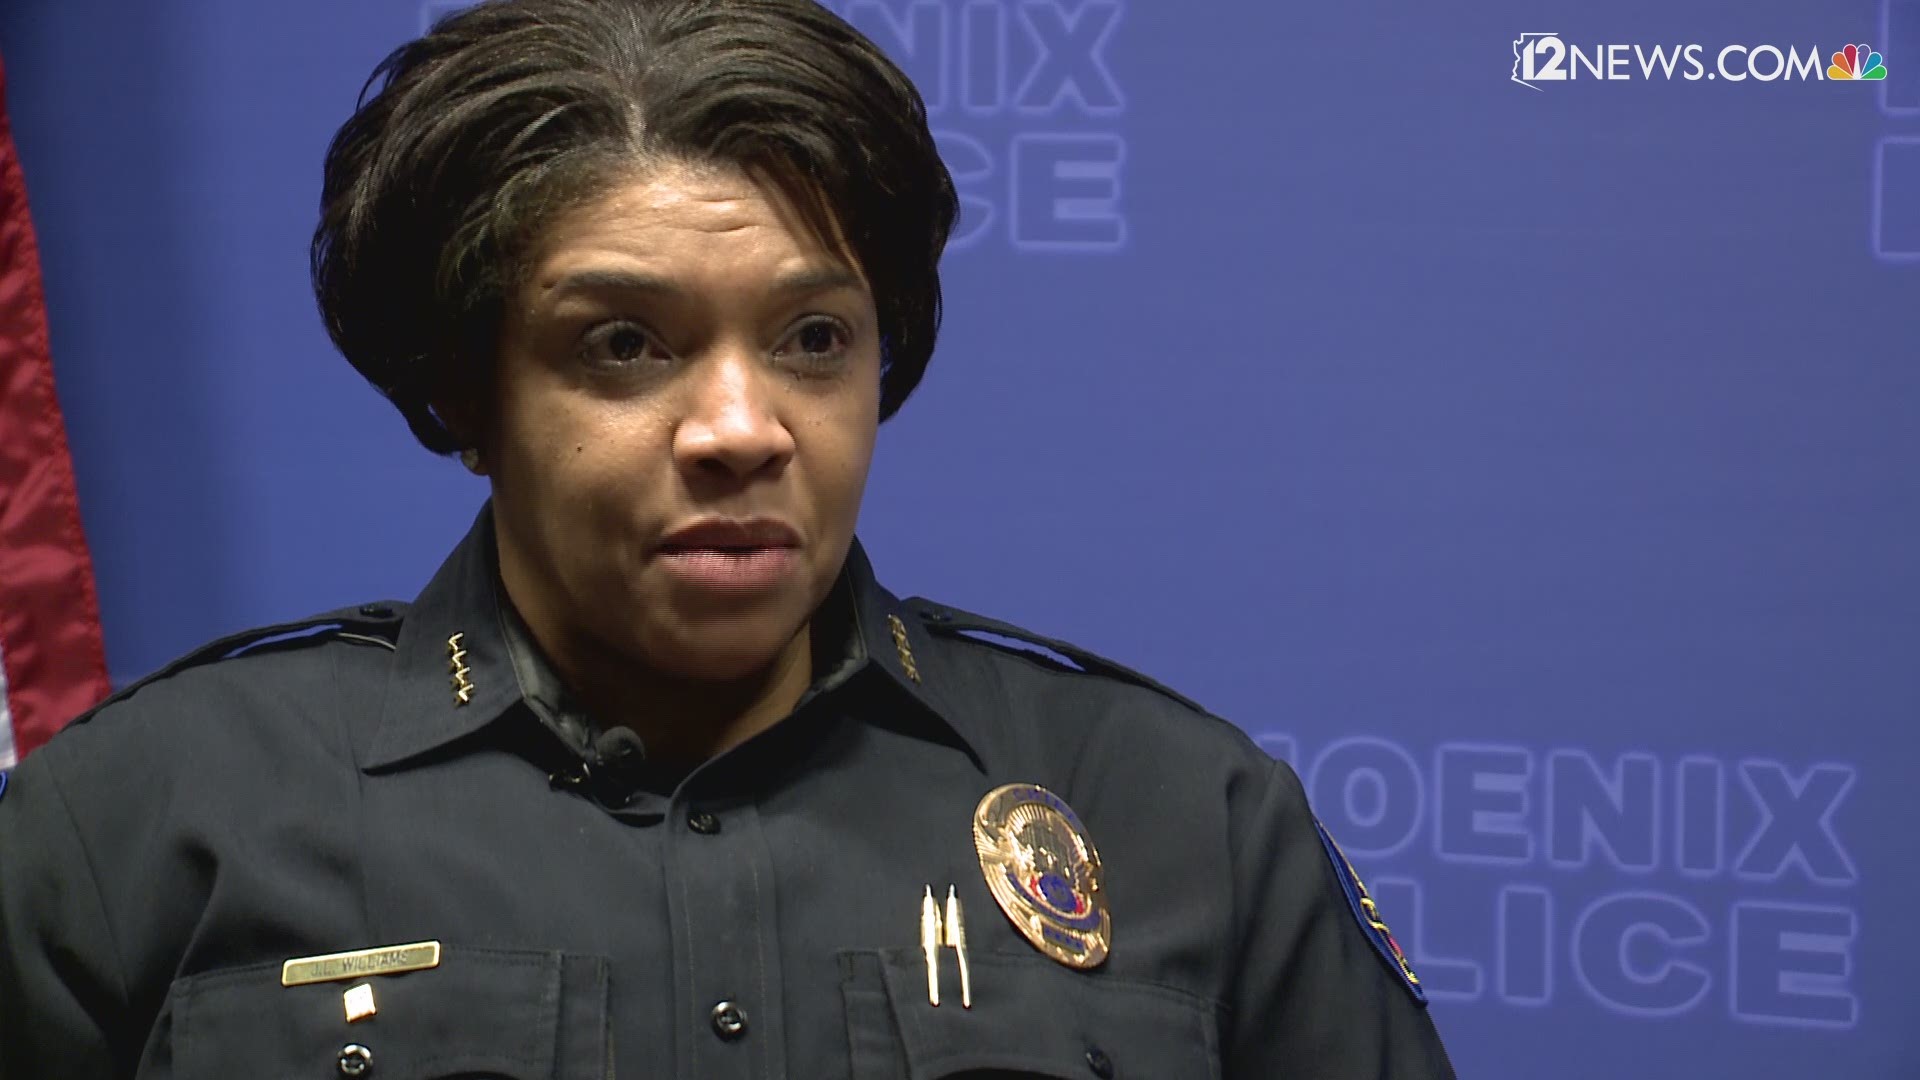 The Plain View Project archived Facebook posts from current and former police officers "that appeared to endorse violence and racism." The database includes posts from officers in various cities, including Phoenix. Phoenix Police Chief Jeri Williams addressed the controversy Tuesday by saying she was shocked and that the posts don't represent her department.